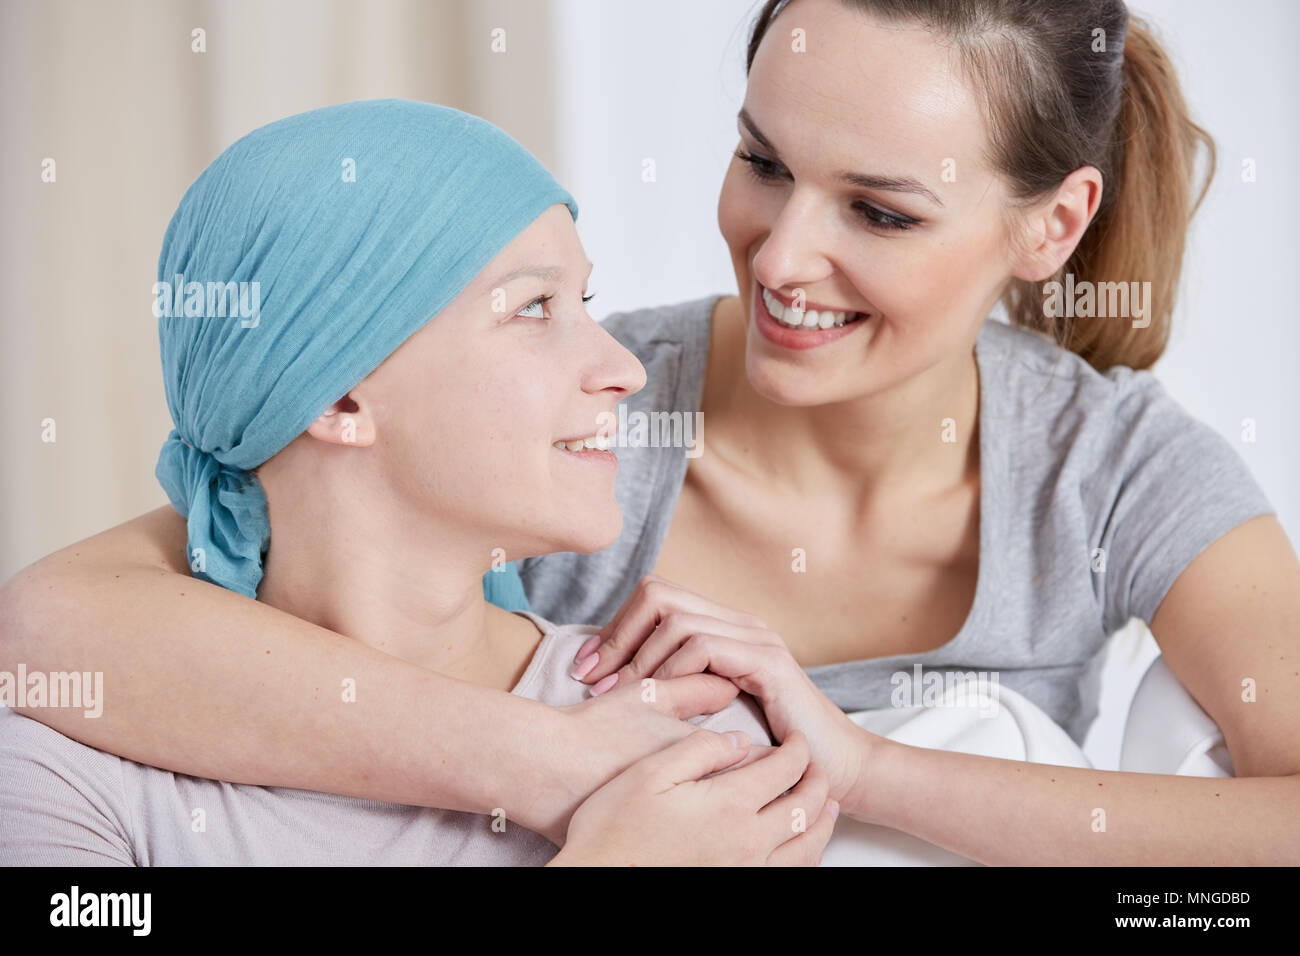 Hopeful cancer woman wearing headscarf, talking with friend Stock Photo